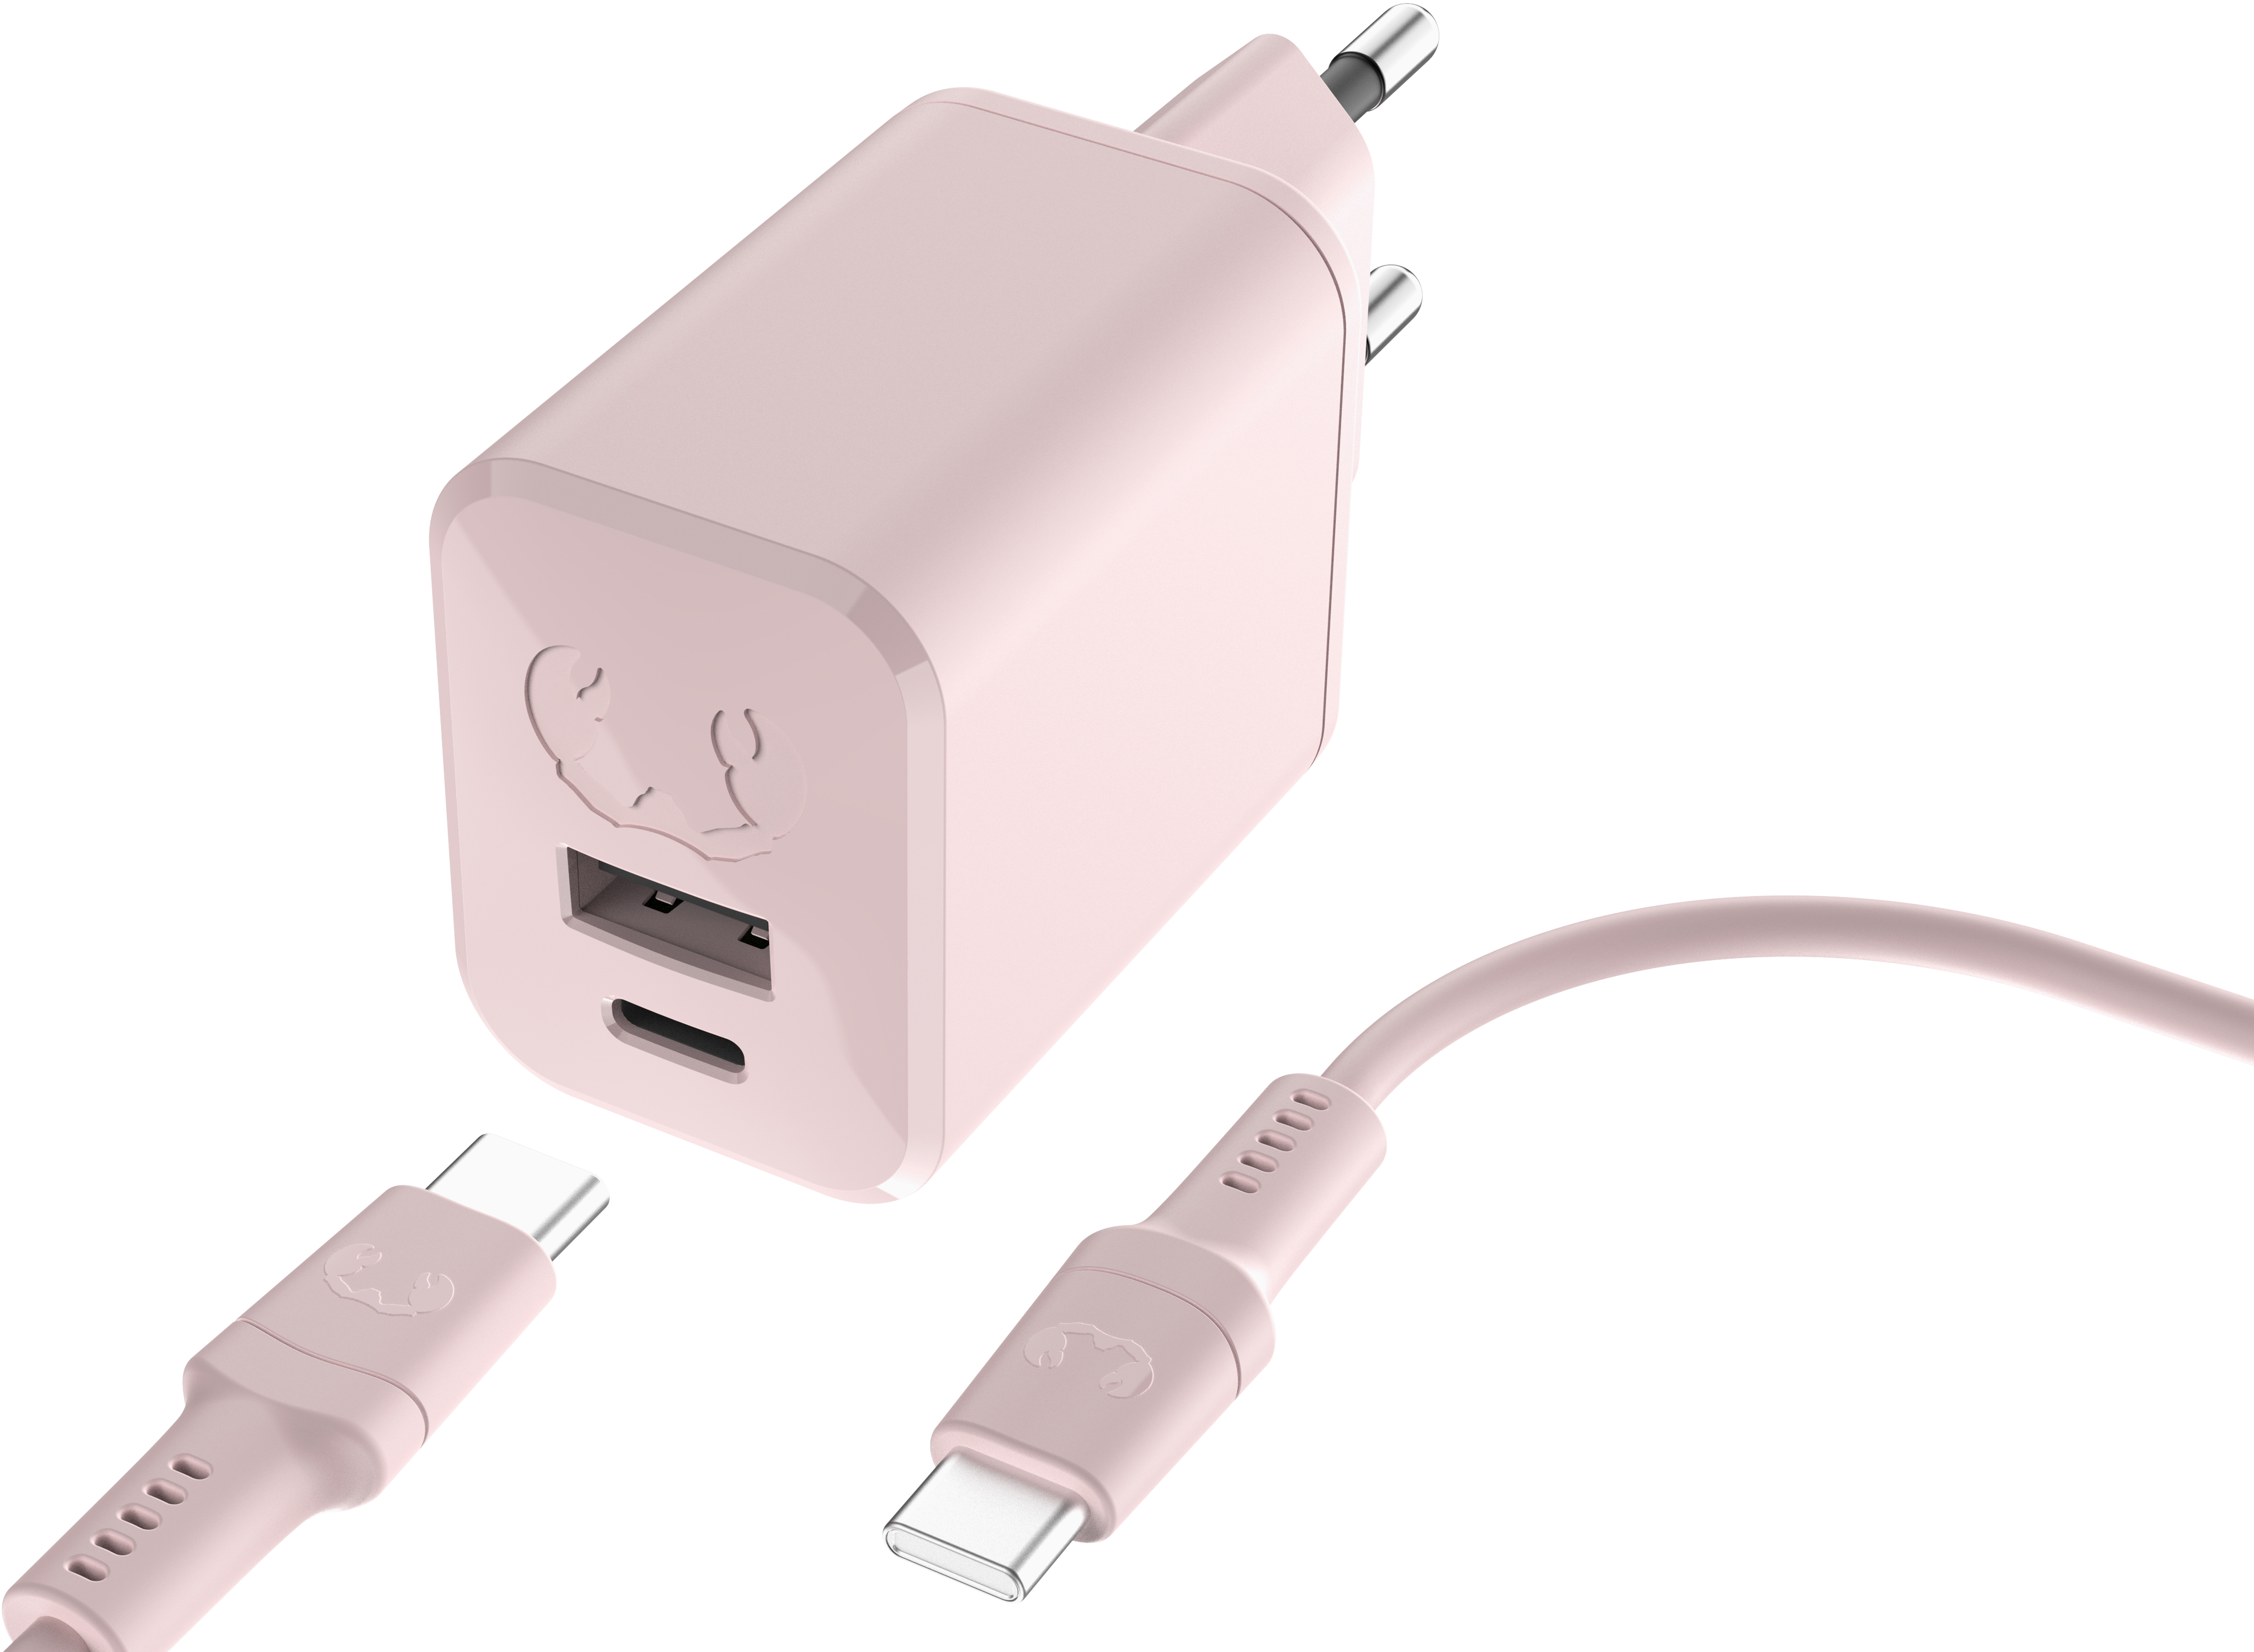 FRESH'N REBEL Charger USB-C PD Smokey Pink 2WCC45SP + USB-C Cable 45W